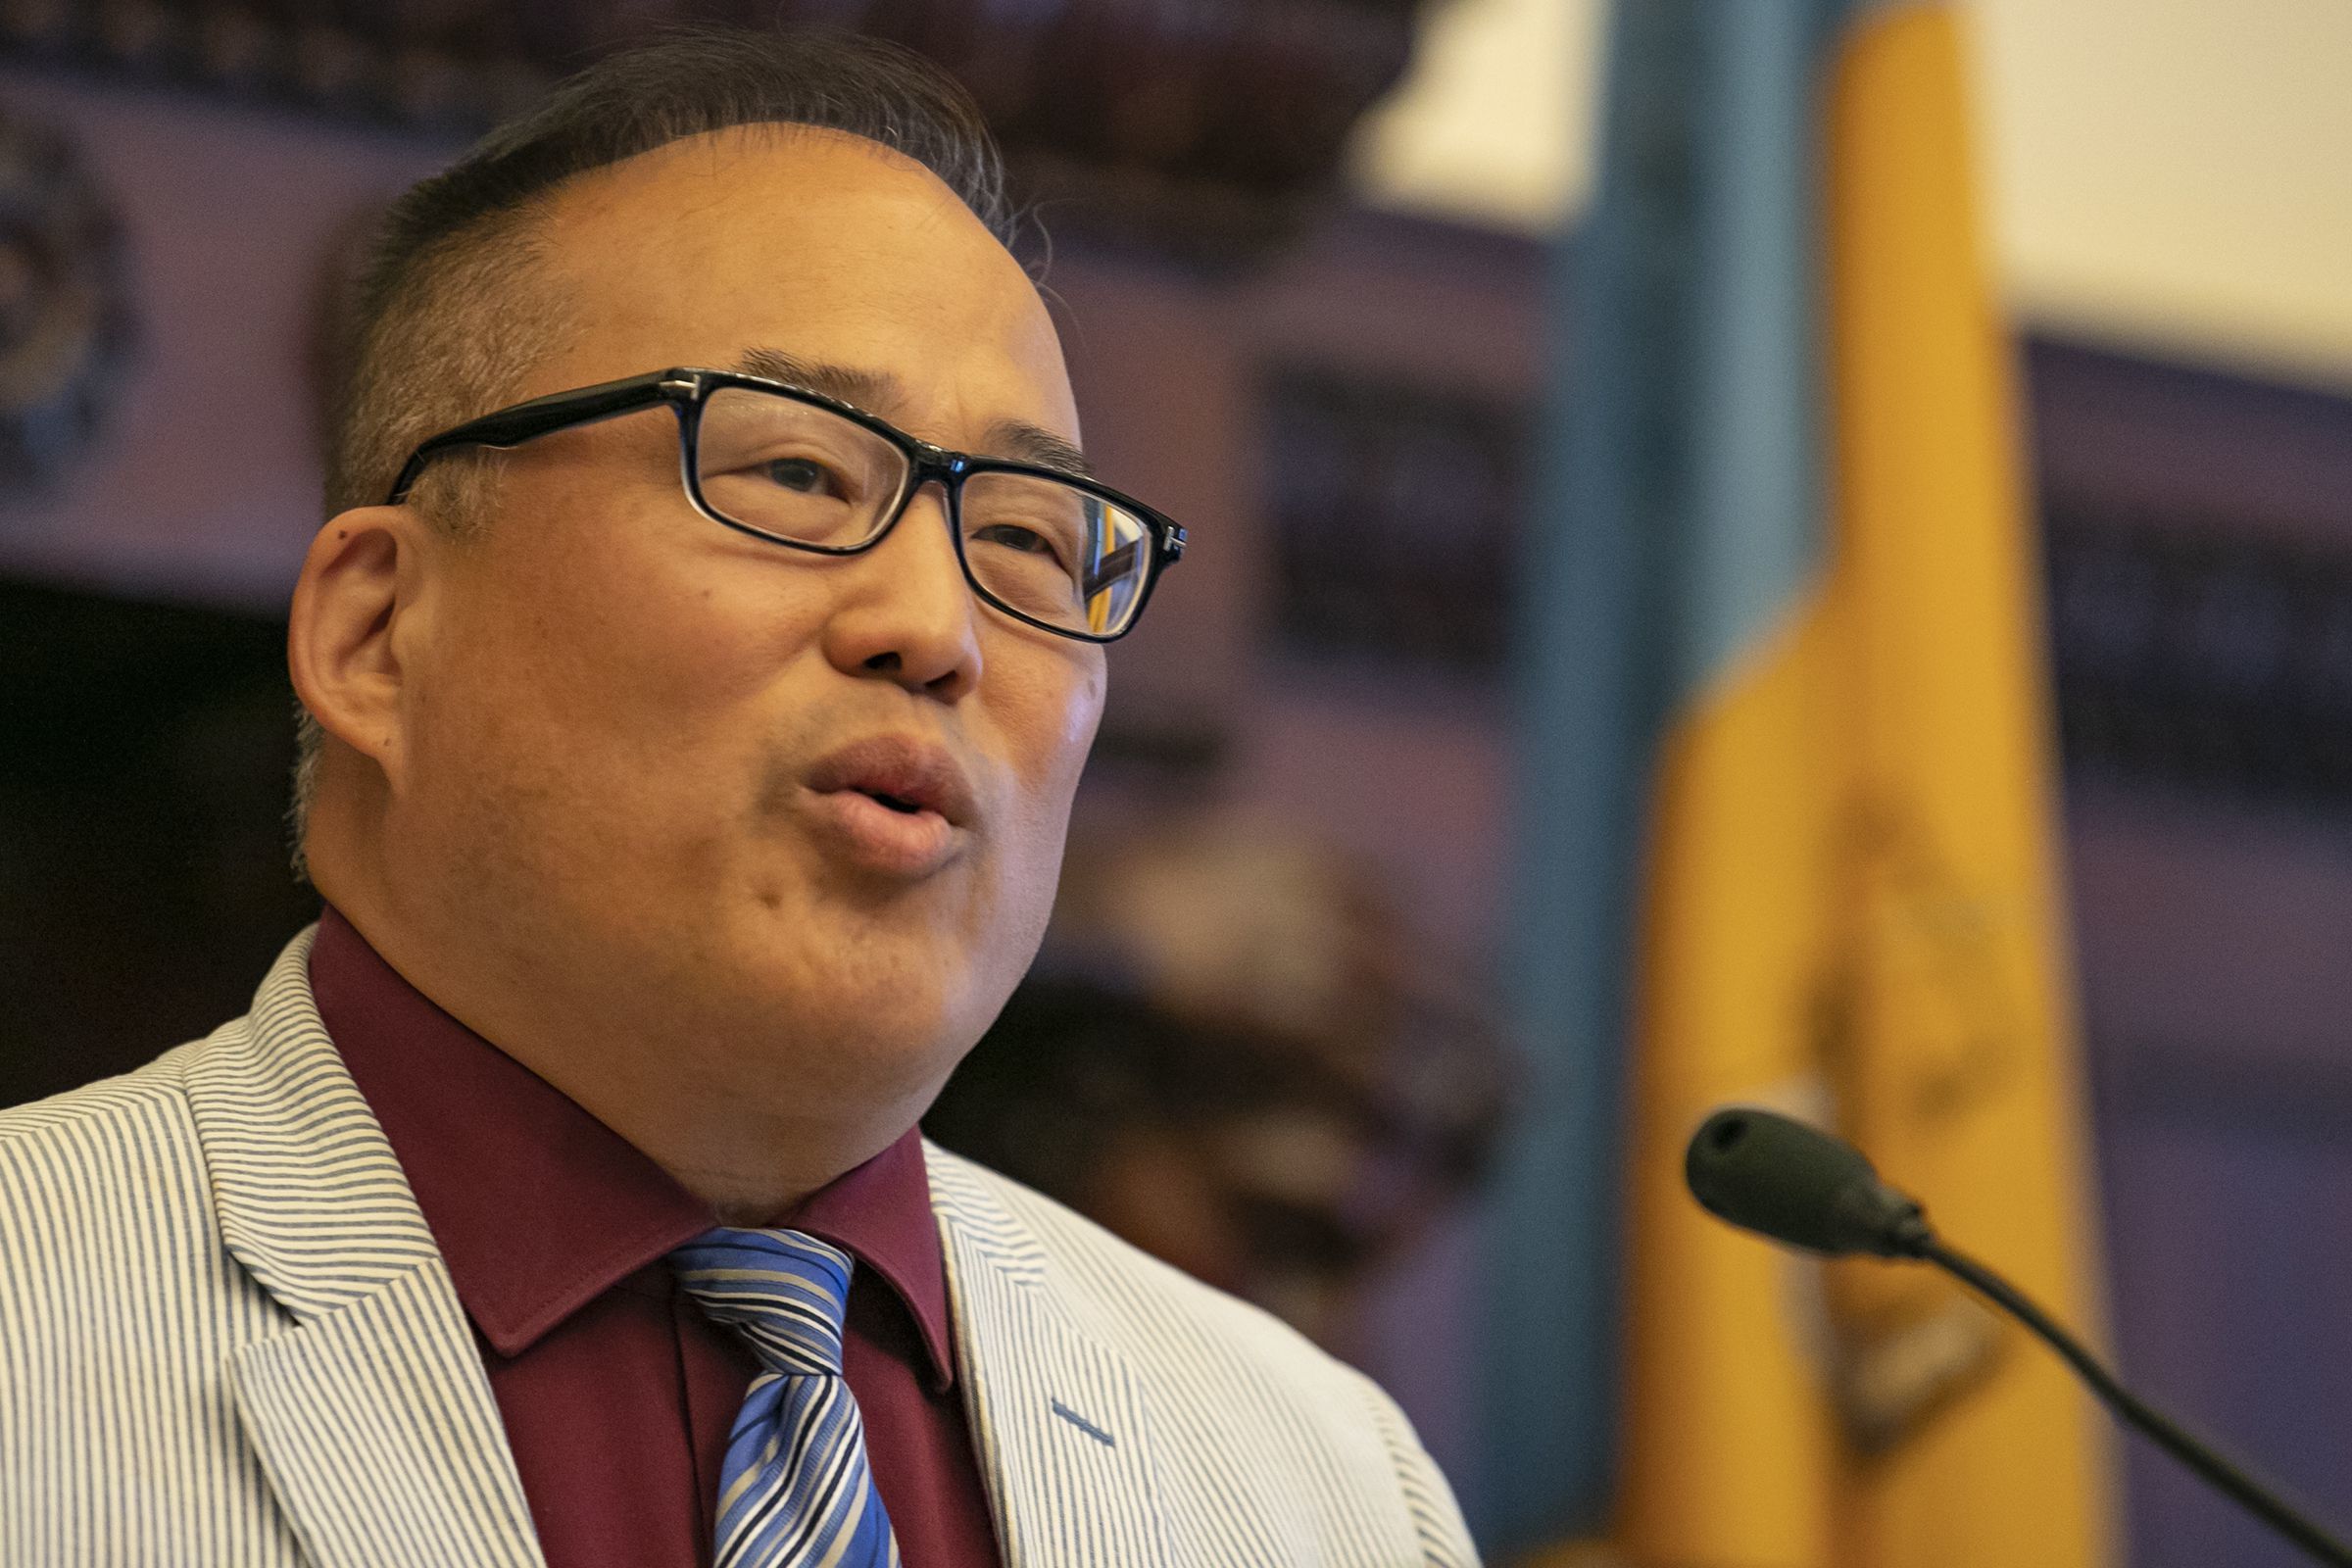 david oh, after years as a rare republican in city hall, will lead asian american chamber of commerce